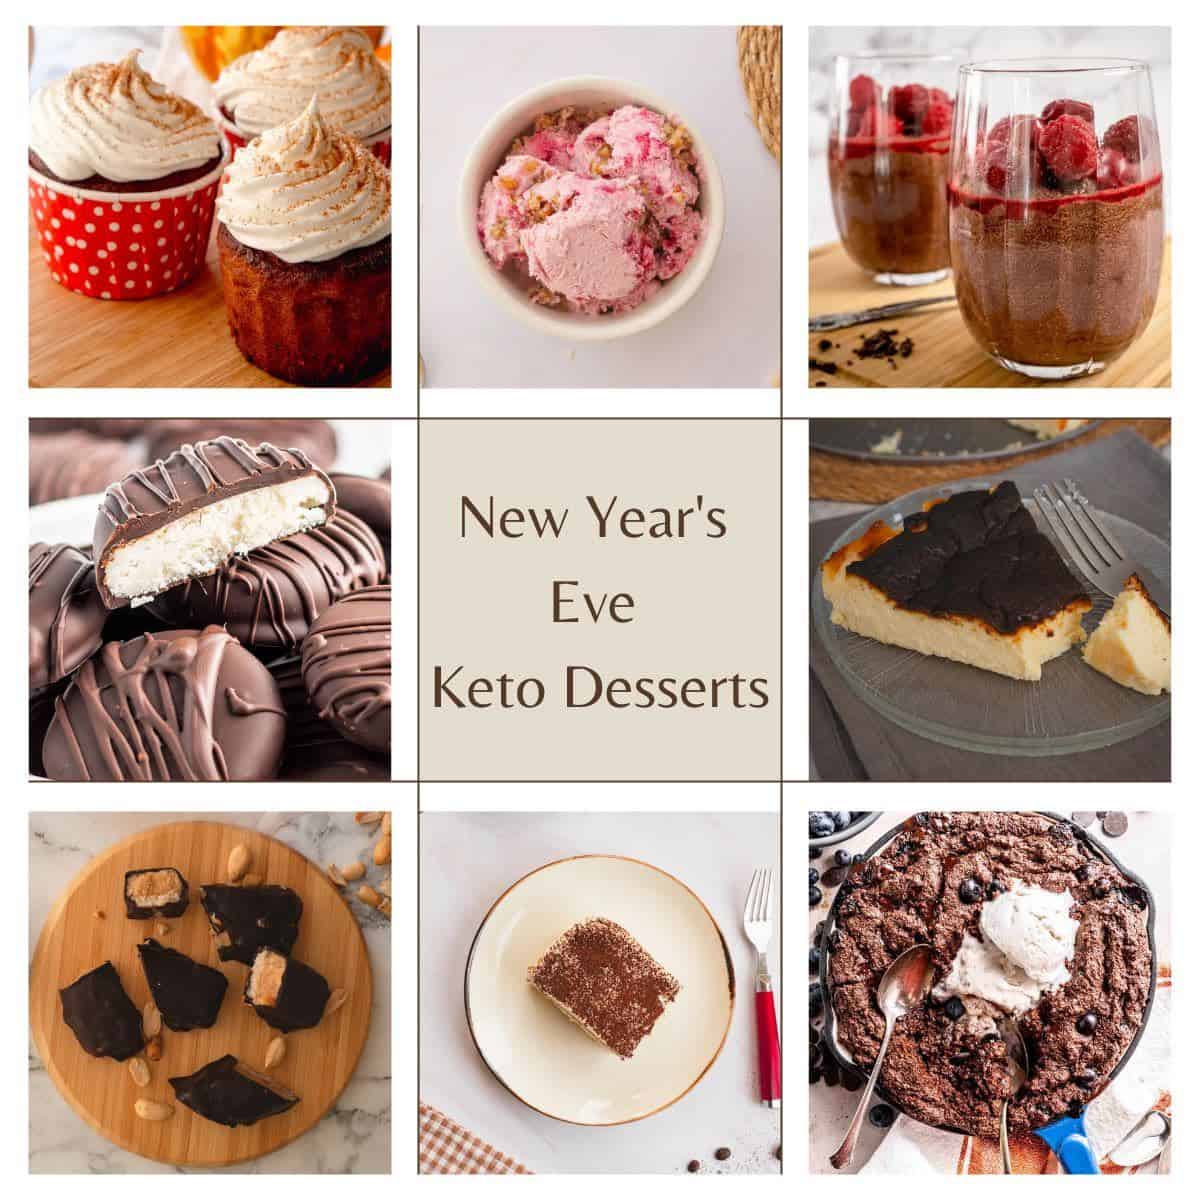 10 Keto New Year’s Eve Desserts (for Sweet New Beginnings!)